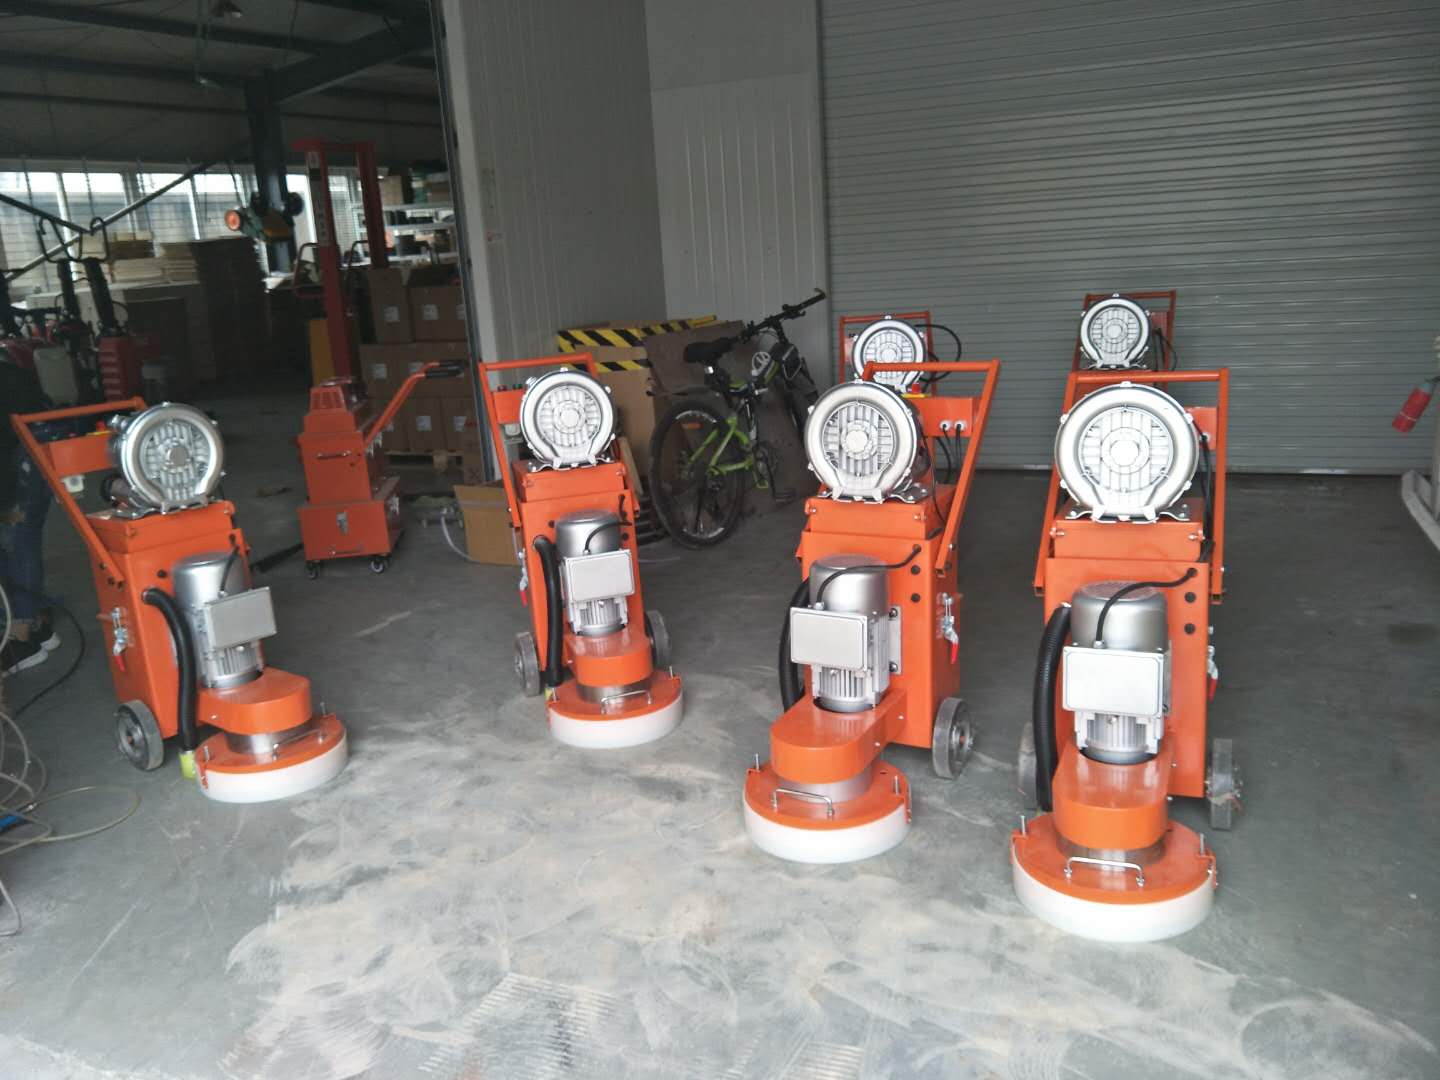 220V concrete grinder with vacuum for export